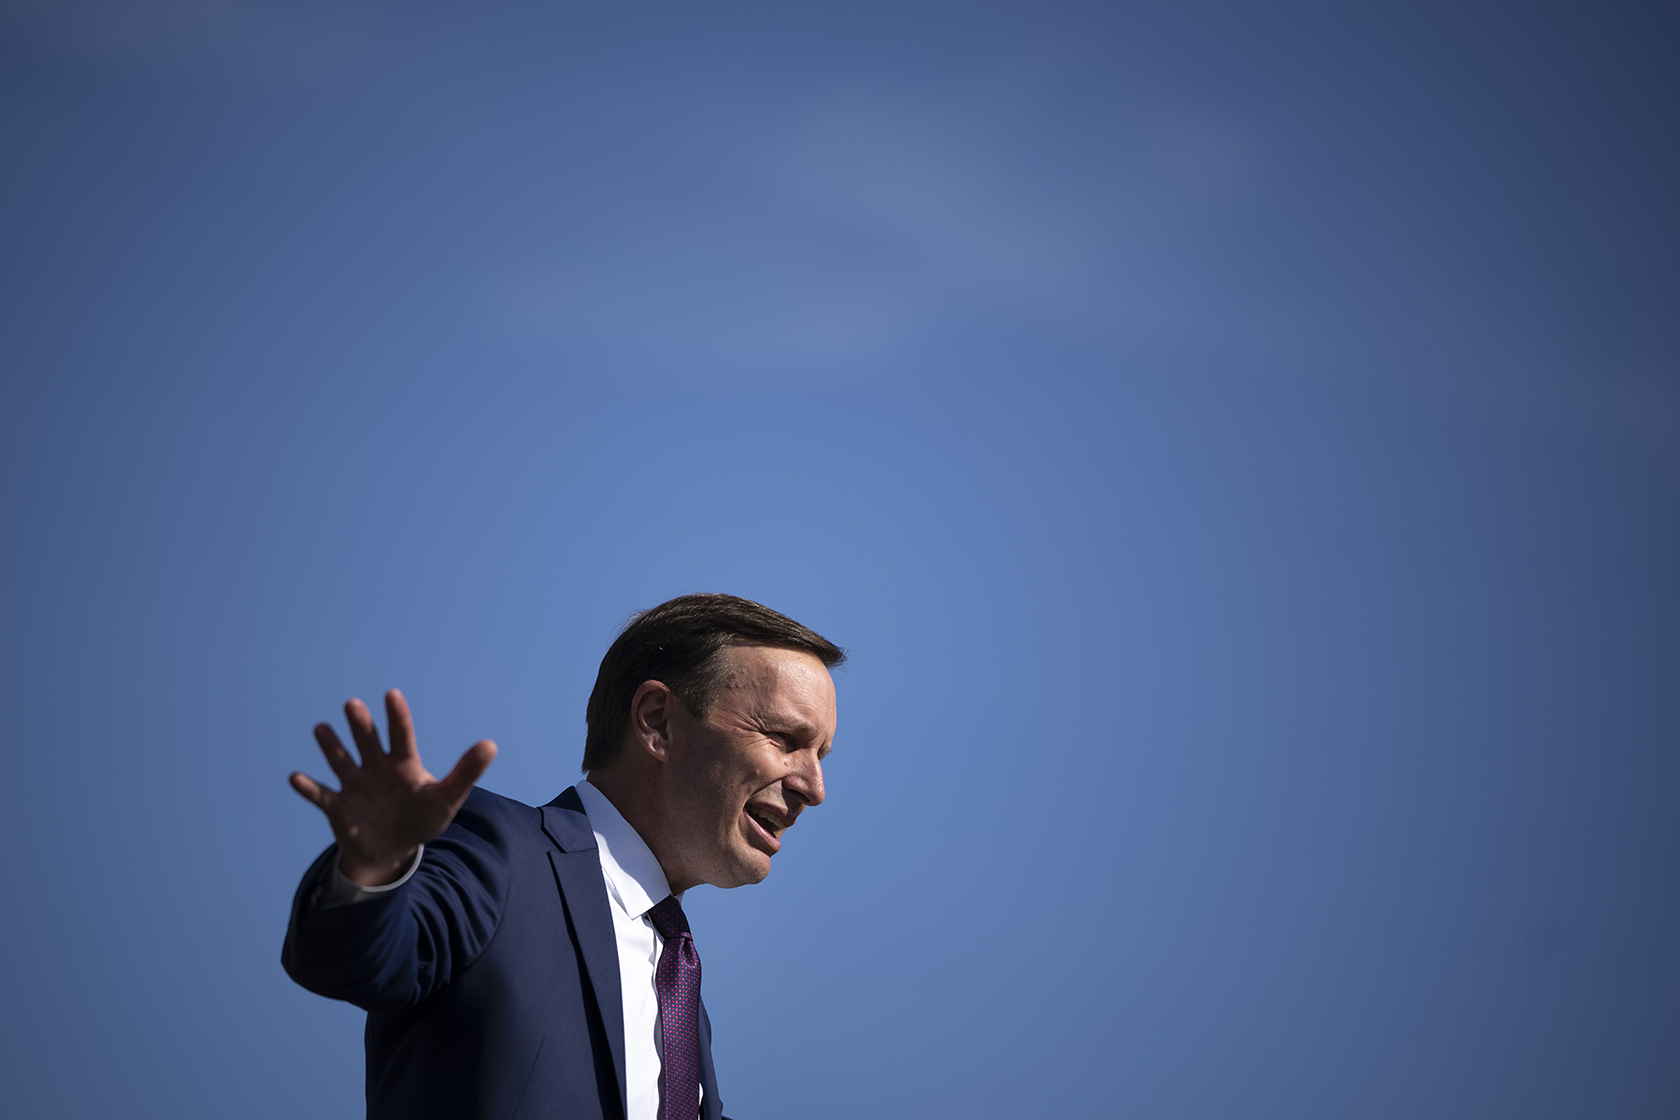 Sen. Chris Murphy (D-CT) speaks during a rally against gun violence outside the U.S. Capitol on June 6, 2022 in Washington, DC.